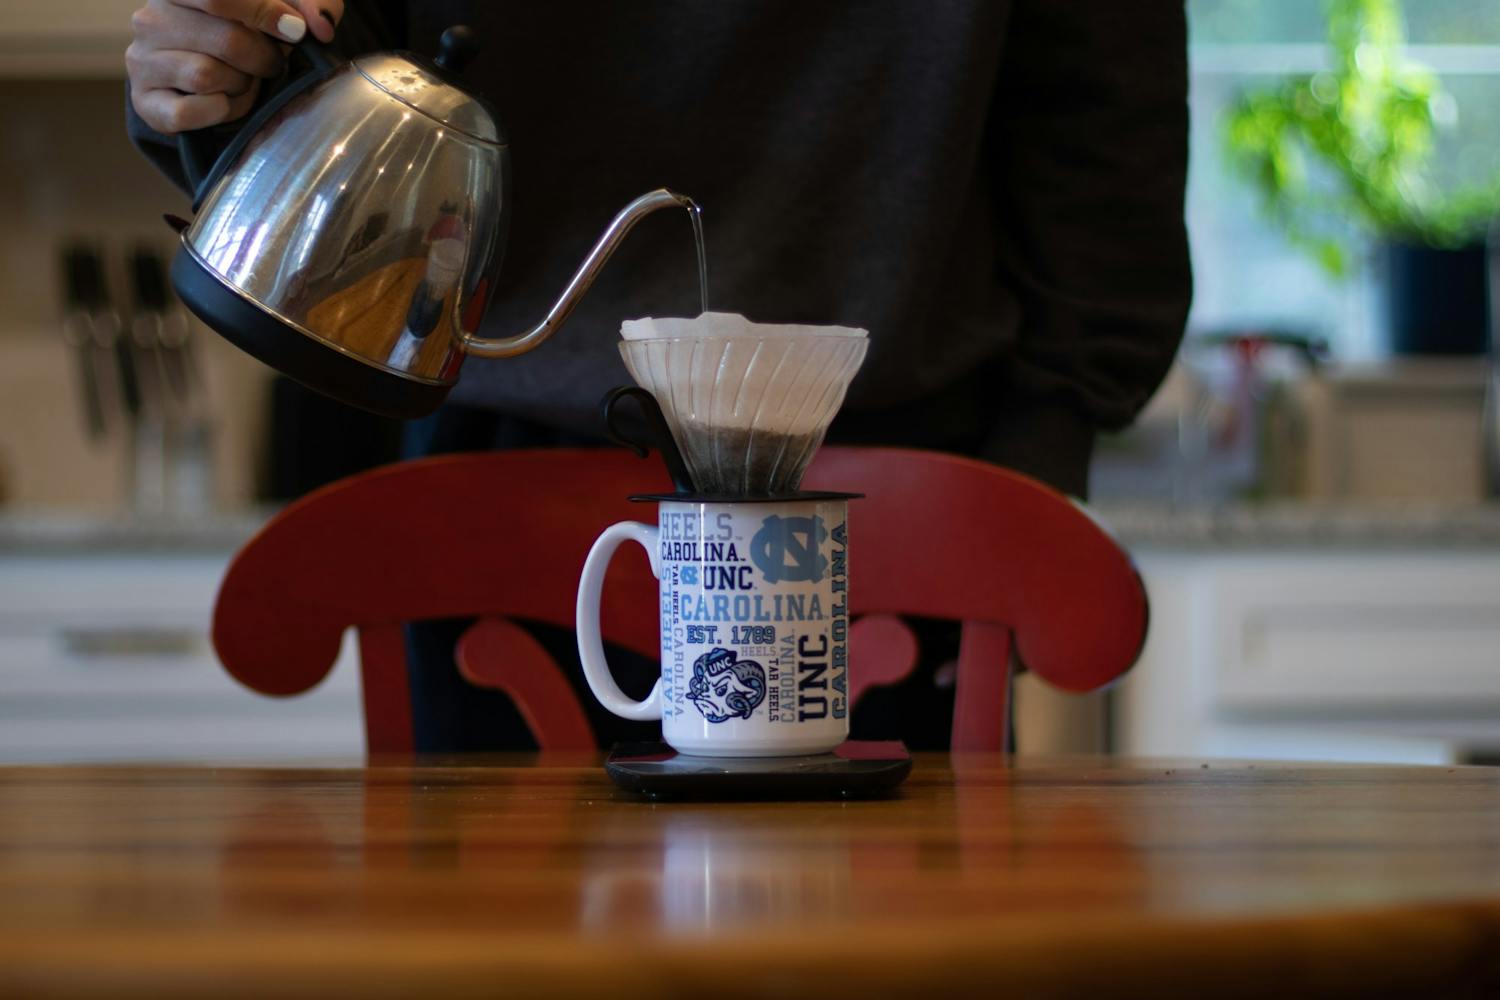 20201013_McConnell_At-Home-Barista-Photo-Illustration-26.jpg